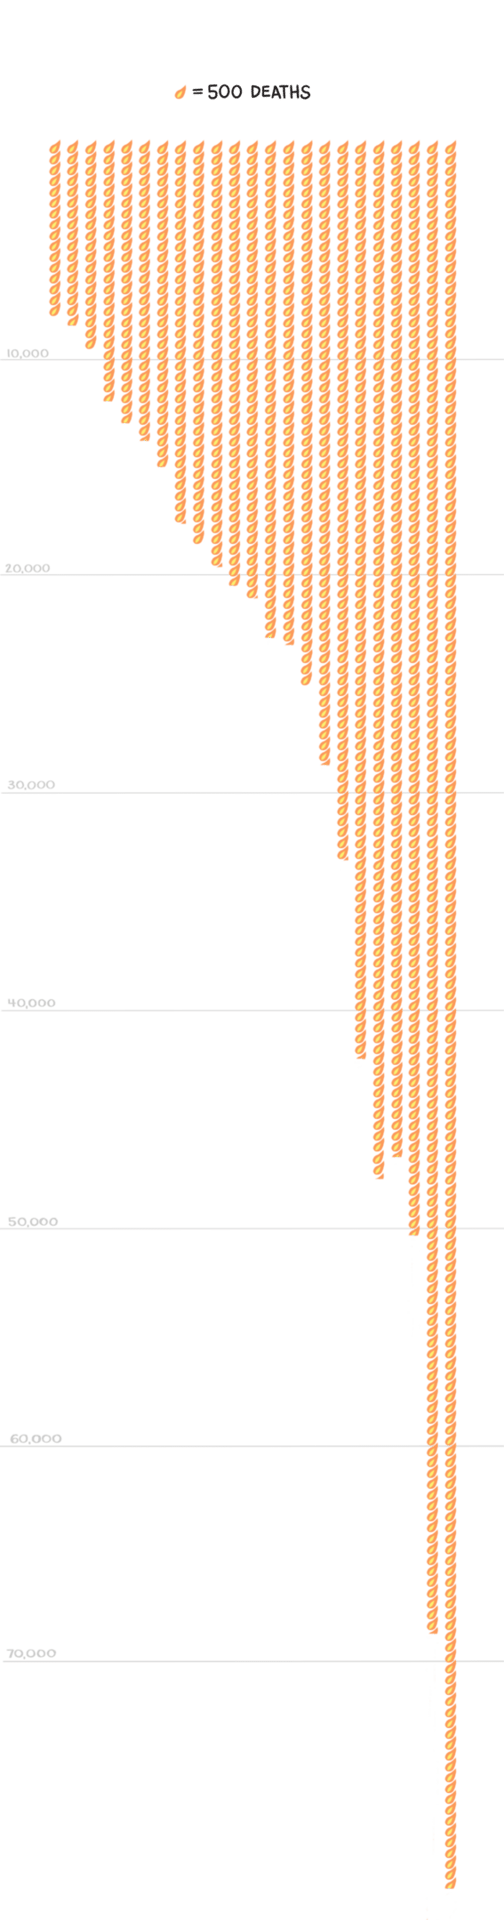 Grouped symbol chart showing number of deaths from opioids from 1999-2021. The icons are stacked in bars for each year and increase at a steep rate as you get closer to 2021. 